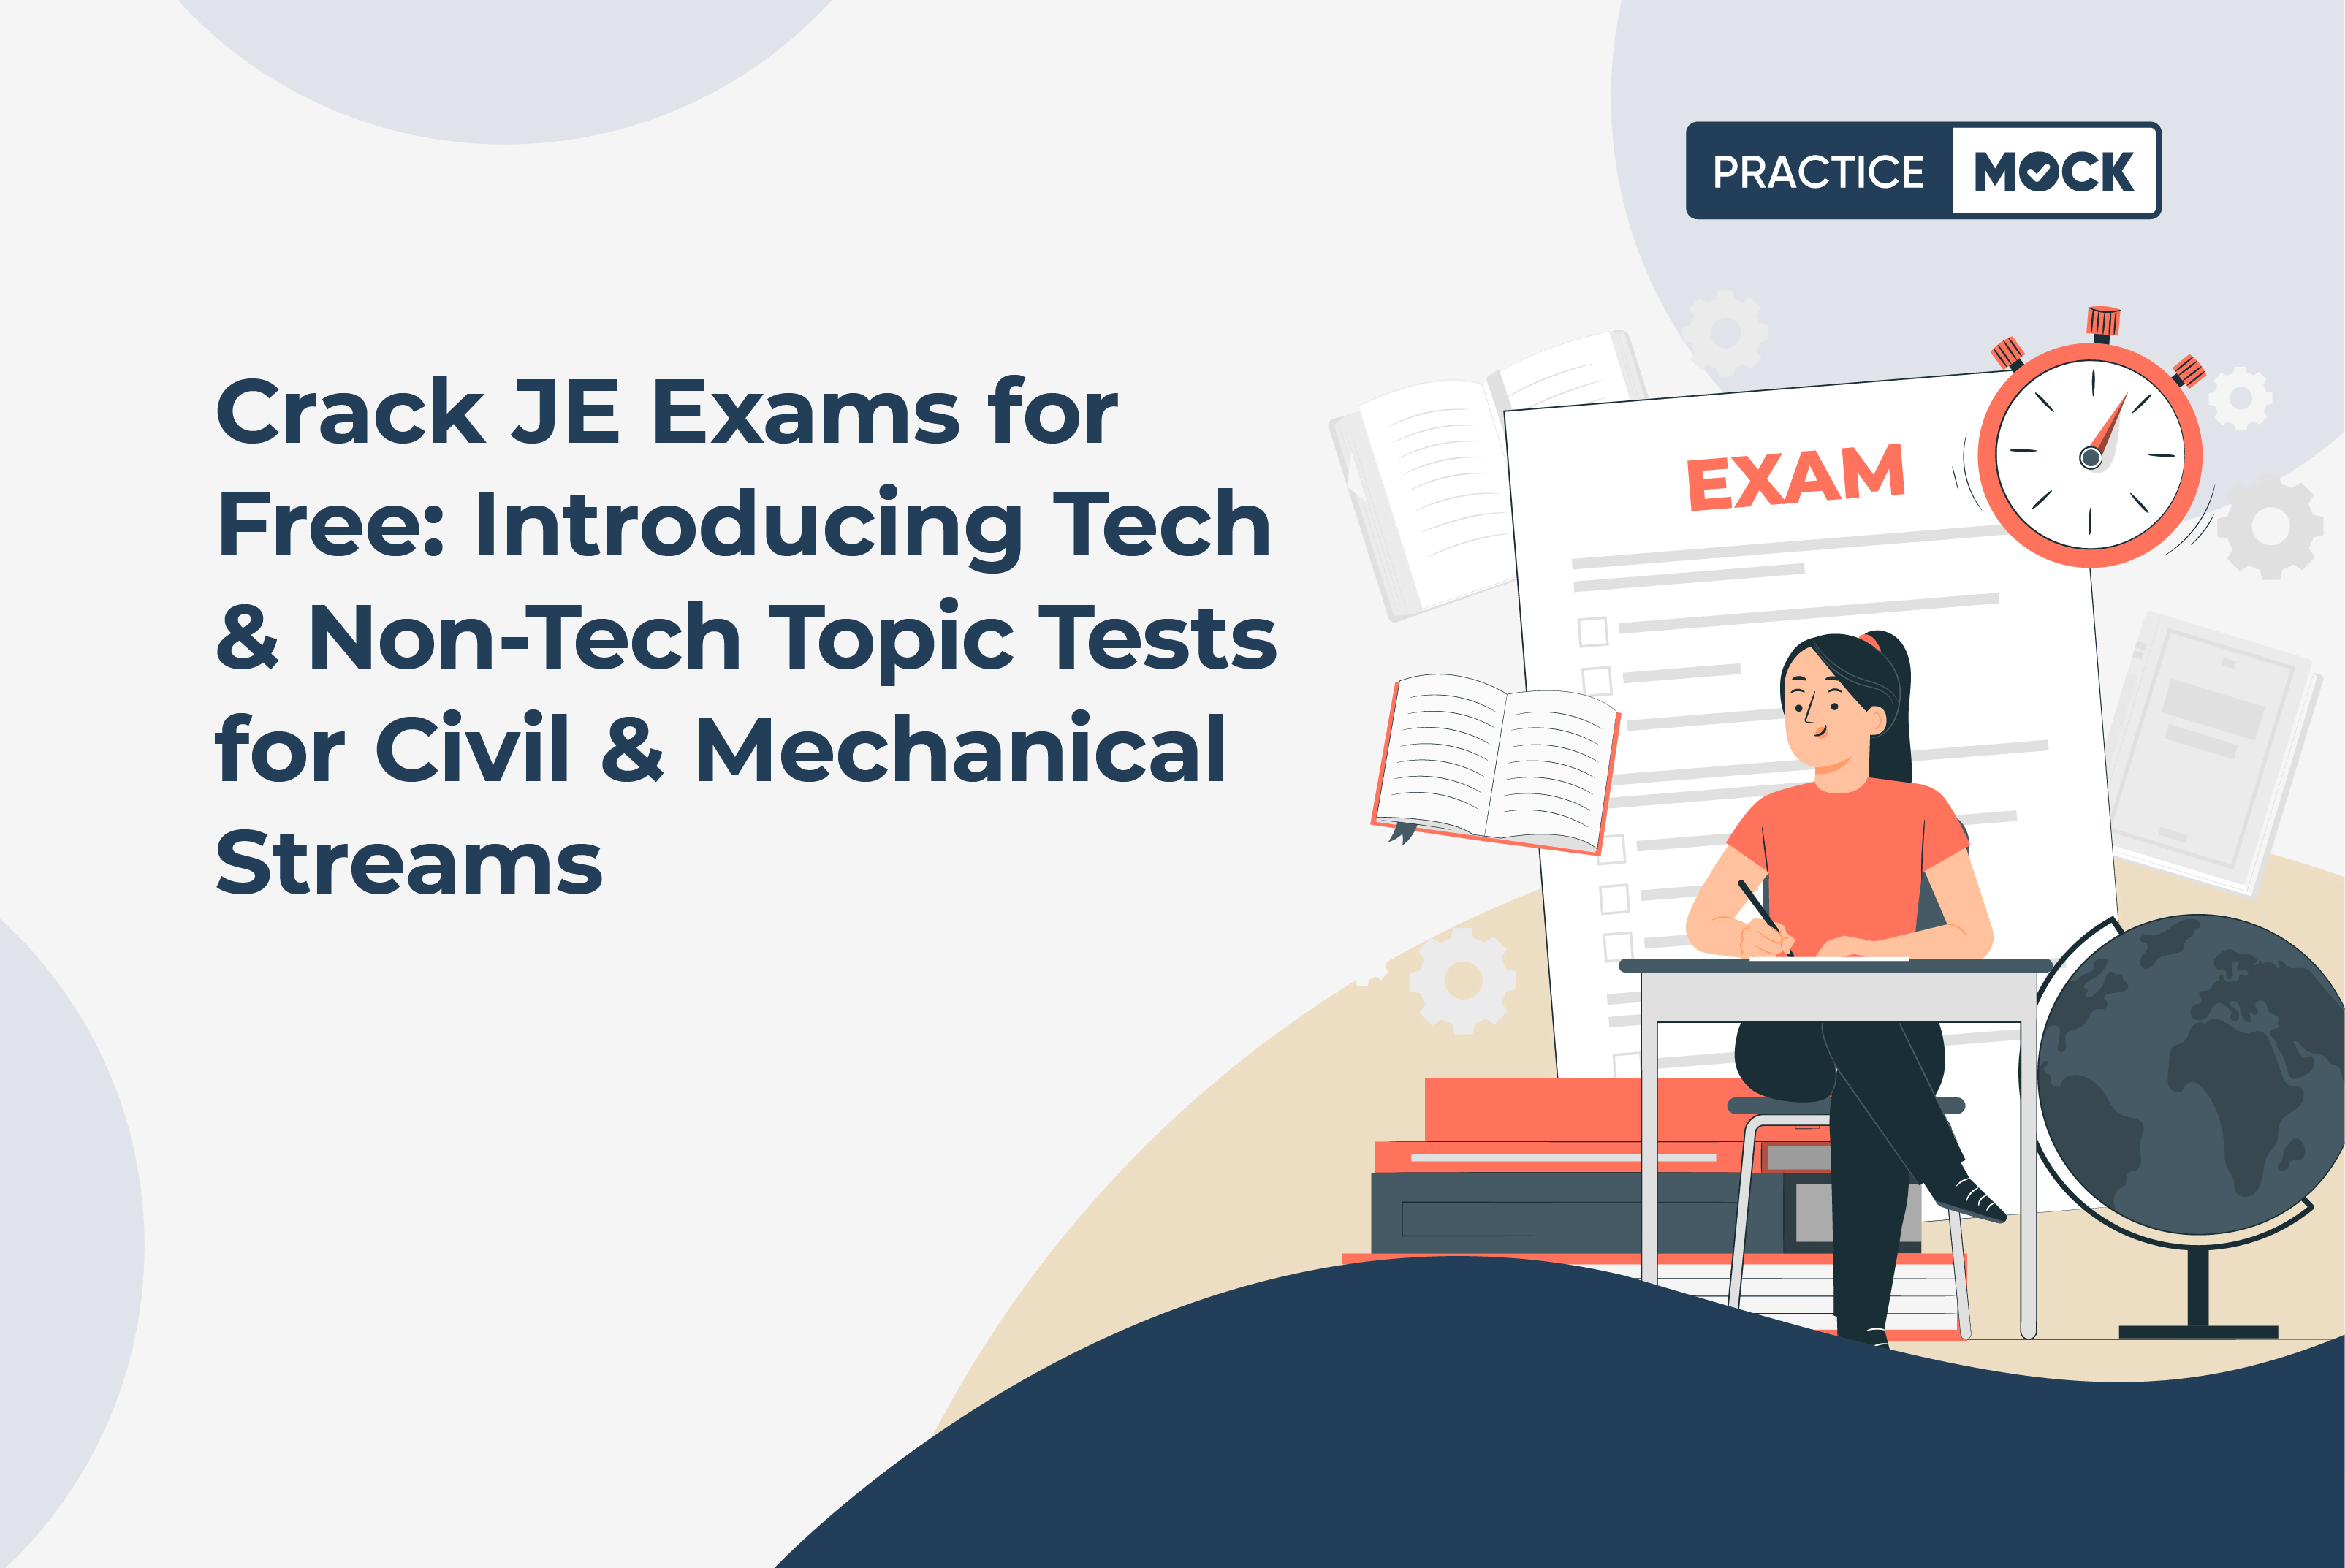 Crack JE Exams for Free: Introducing Tech & Non-Tech Topic Tests for Civil and Mechanical Streams